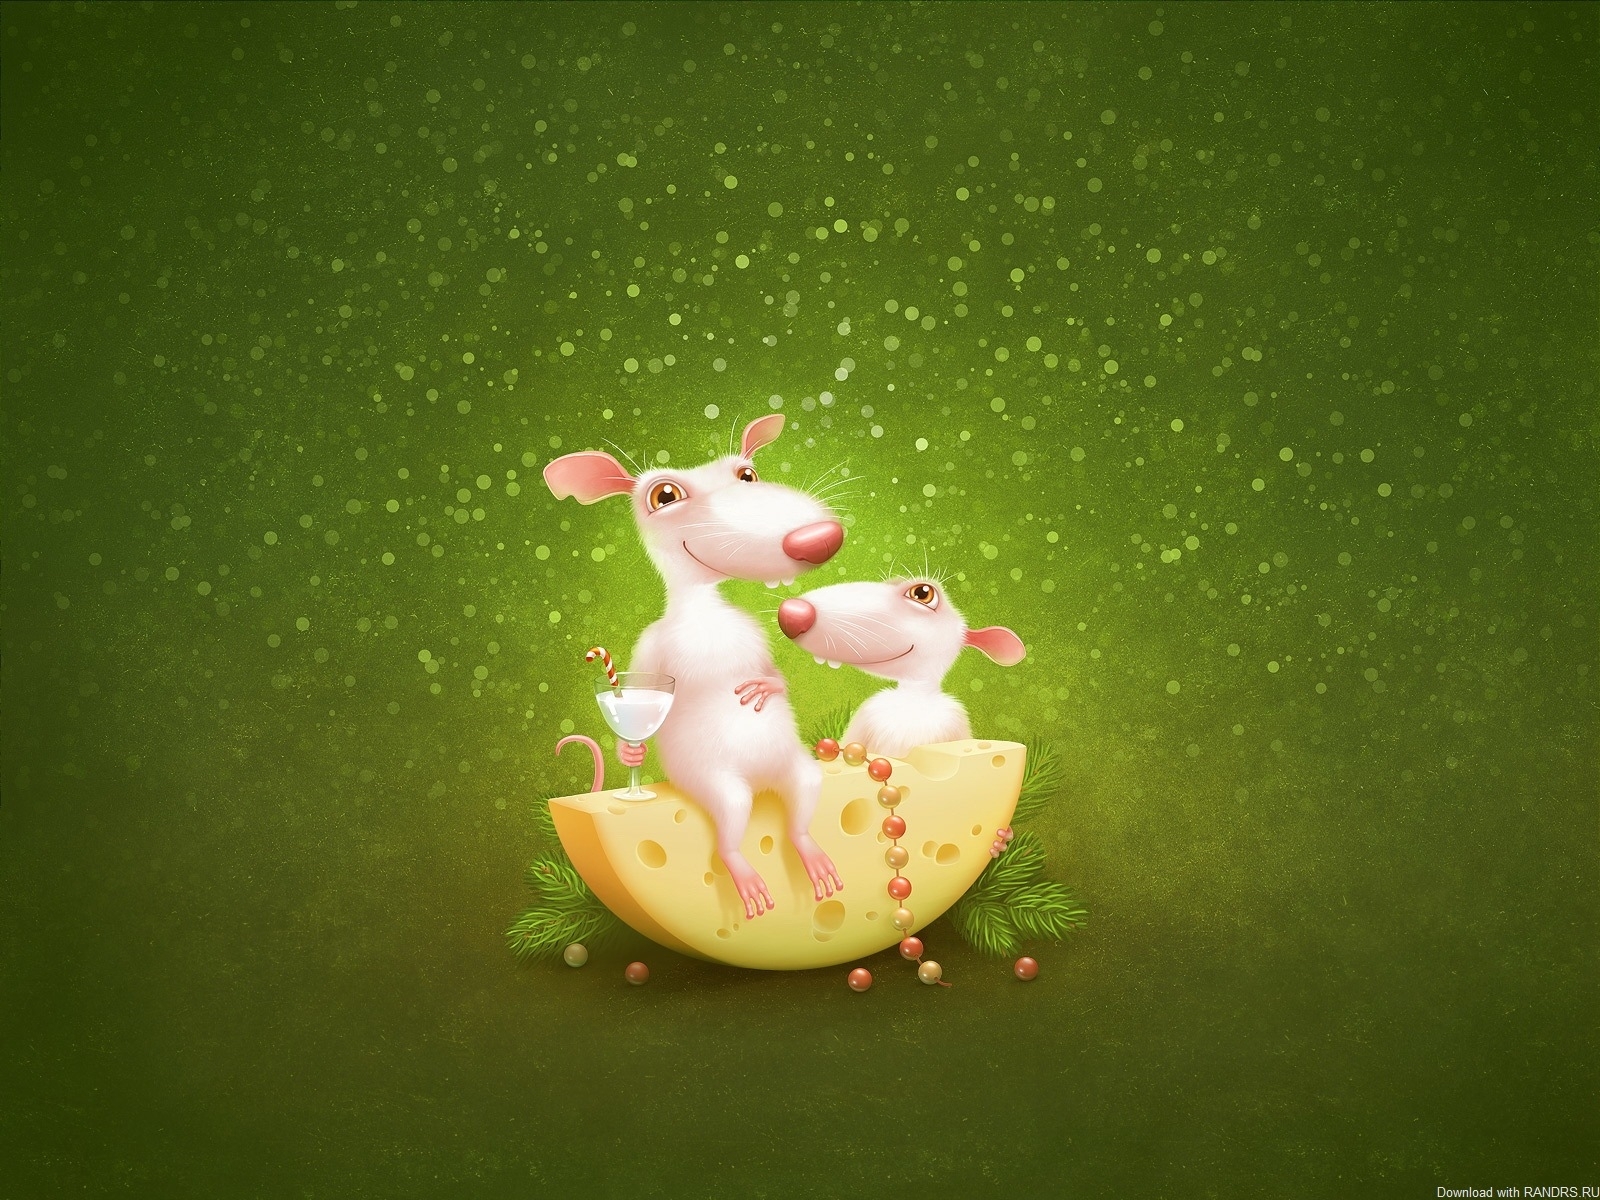 mice, pictures, green